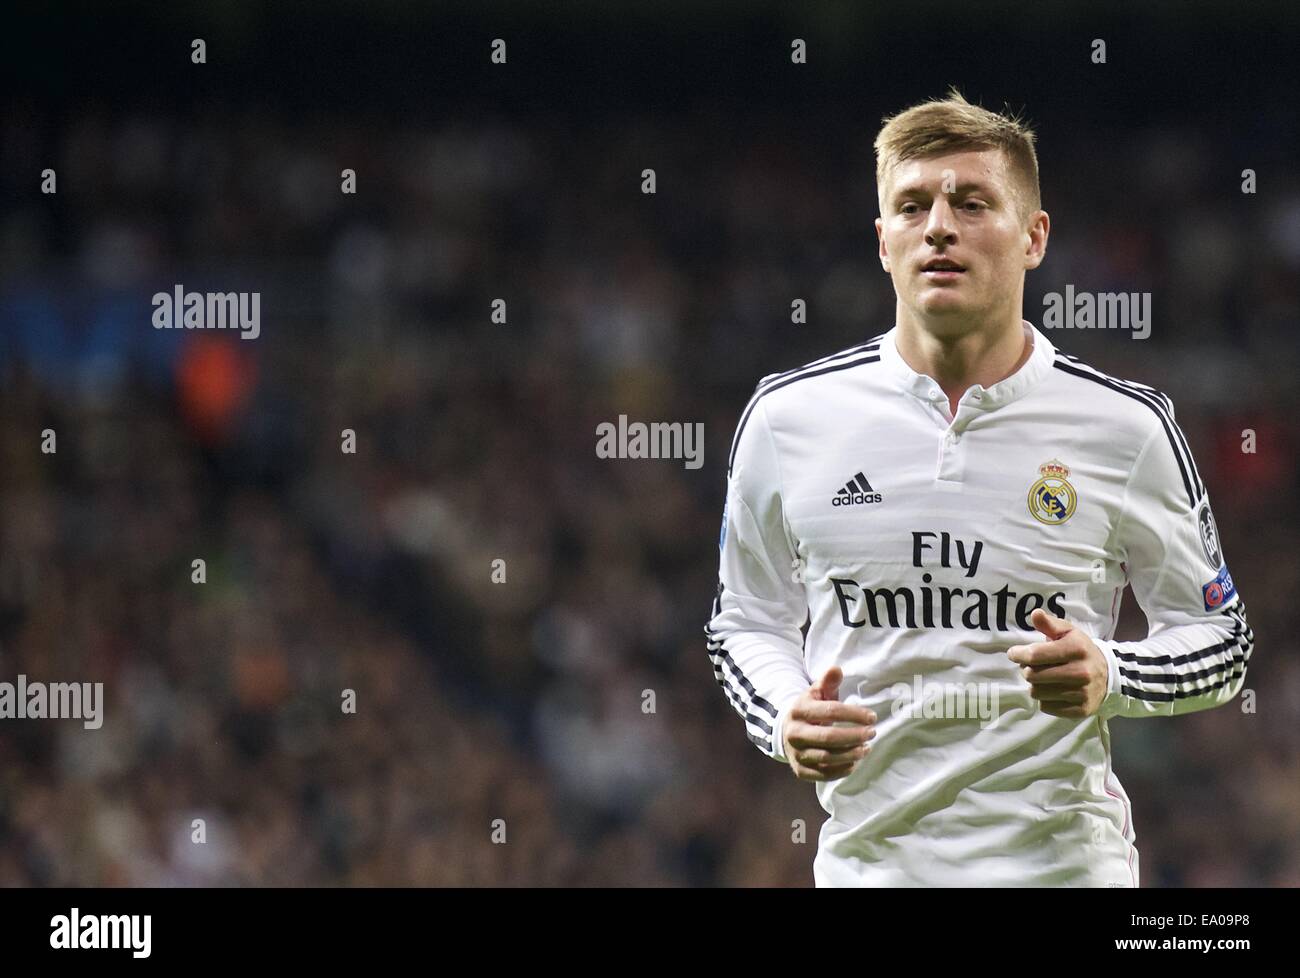 Madrid, Spain. 4th Nov, 2014. Toni Kroos in action during the UEFA Champions League match between Real Madrid and Liverpool. Real Madrid won the match 1-0 at Santiago Bernabeu on November 4, 2014 in Madrid Credit:  Jack Abuin/ZUMA Wire/Alamy Live News Stock Photo